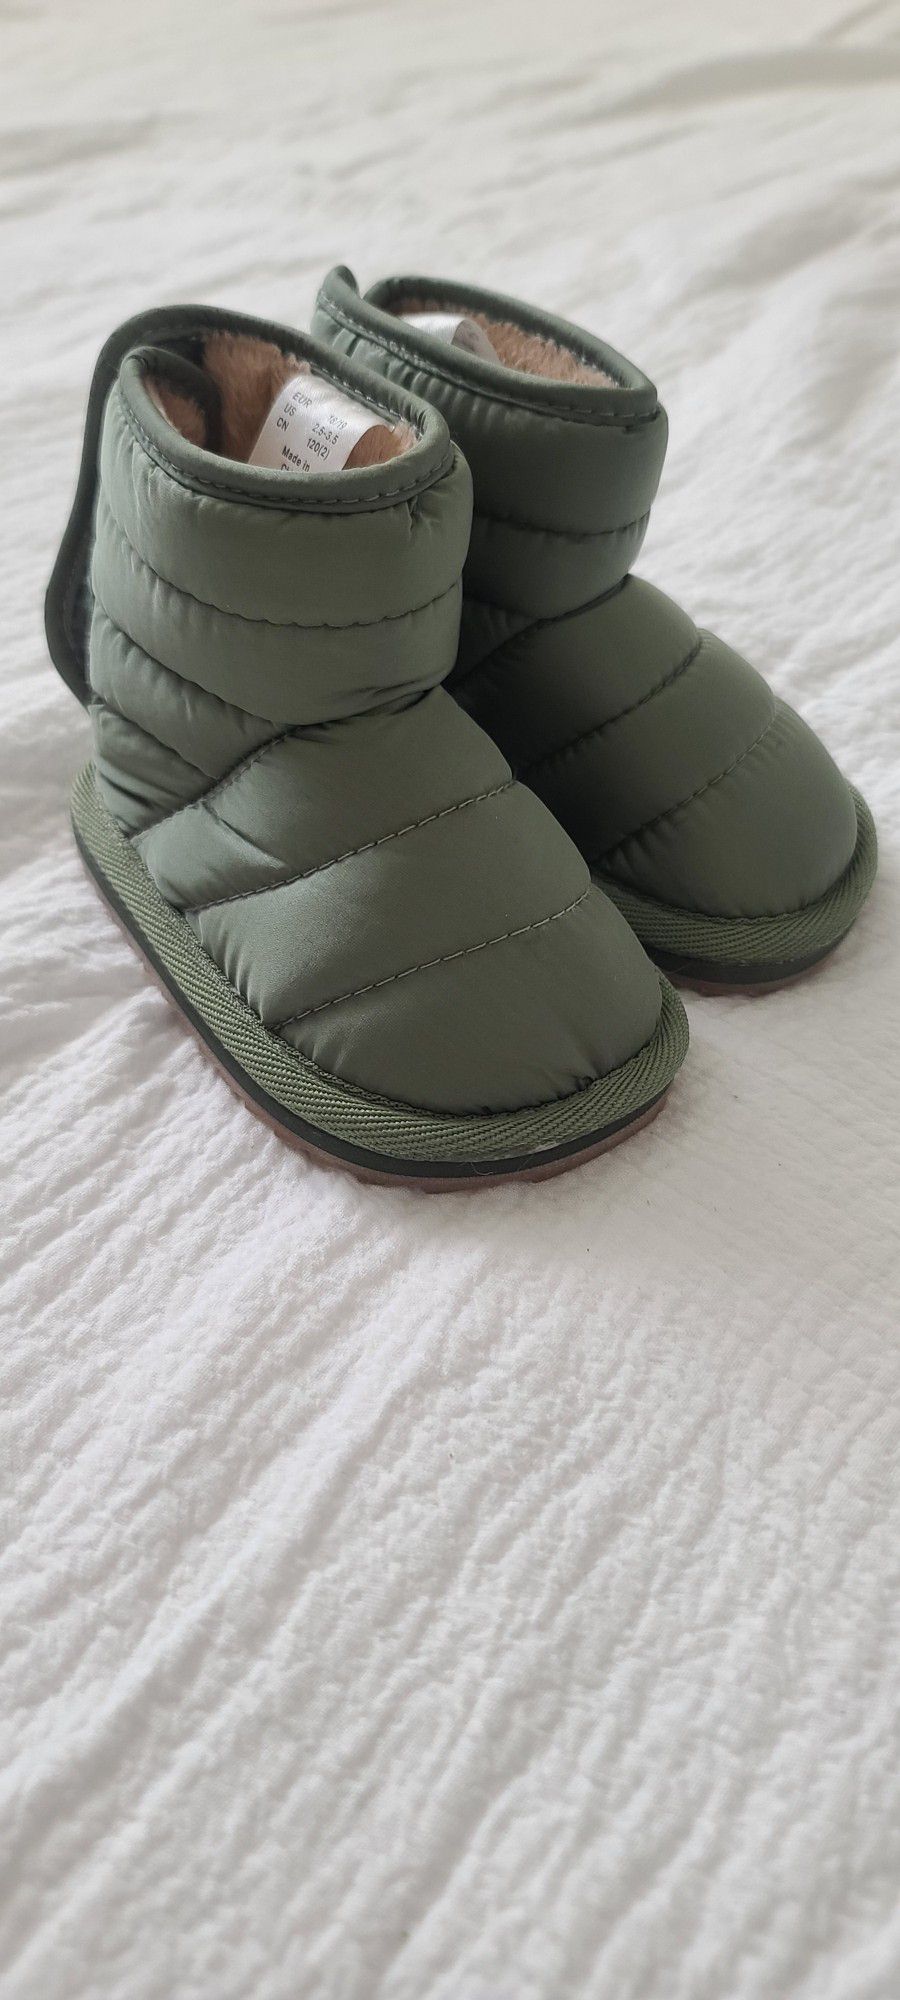 Winter, Rain, Snow Boots For Baby